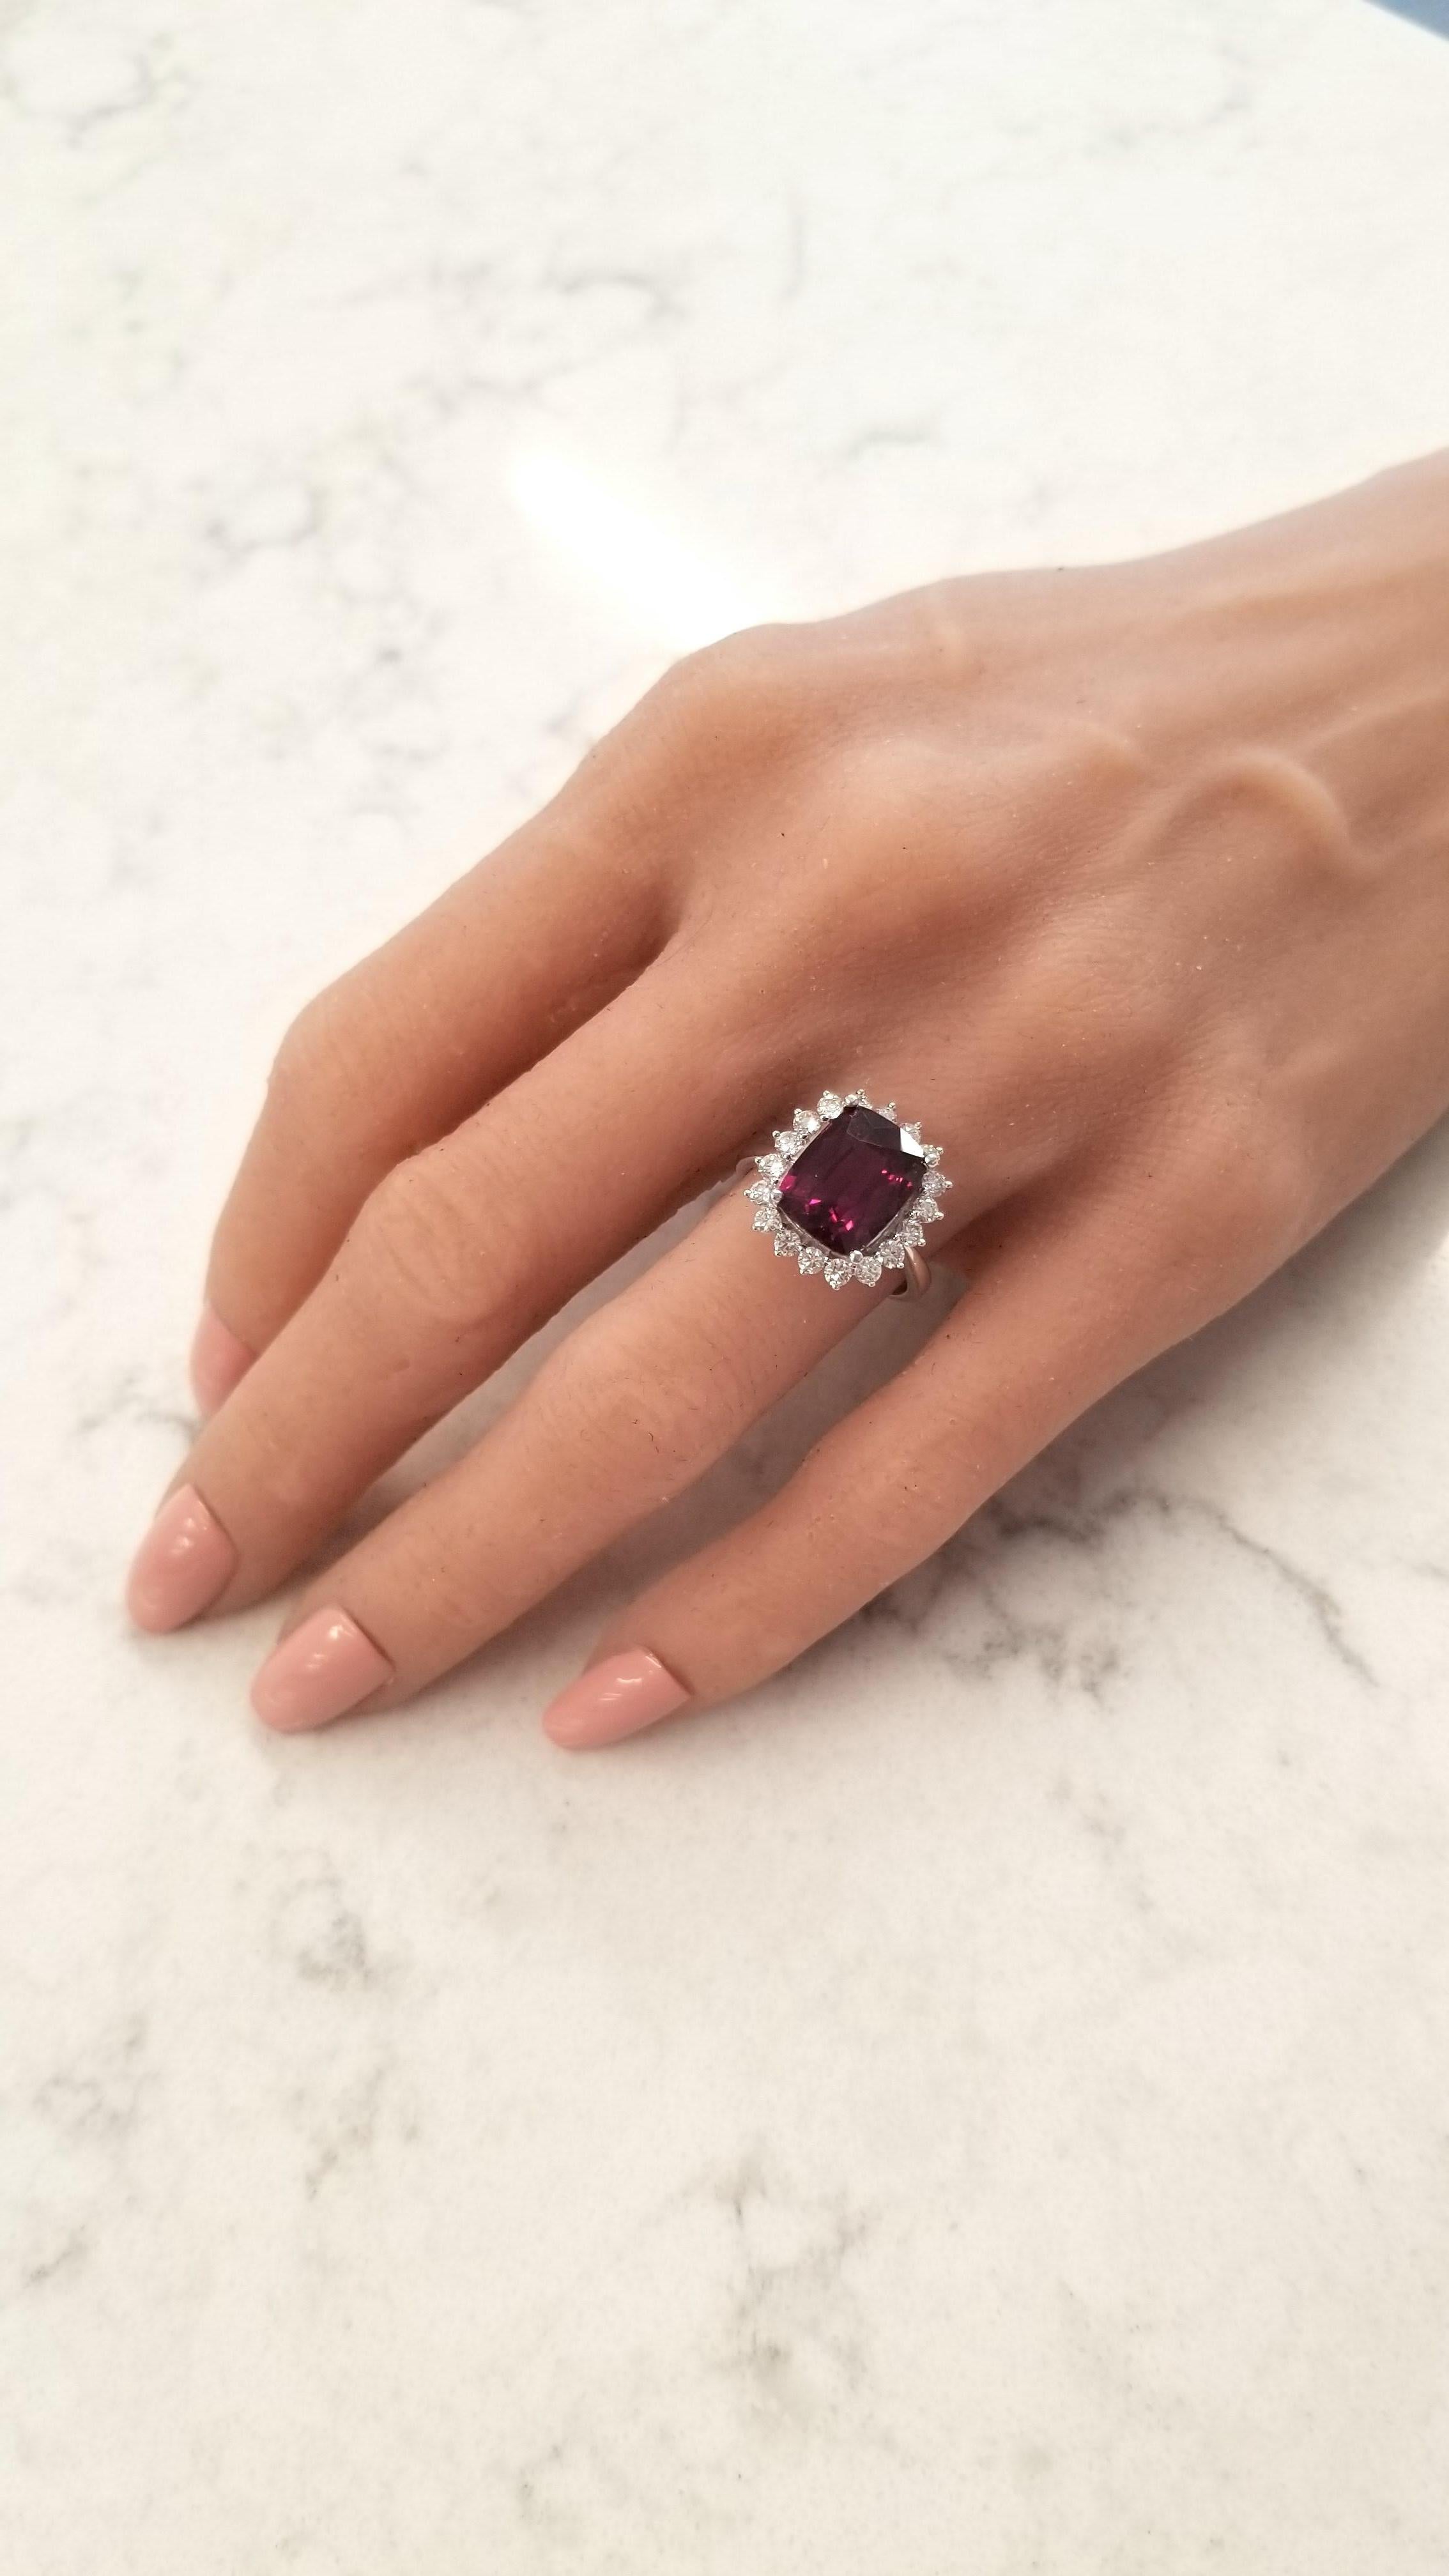 This gem ring features a 5.14 carat cushion cut rhodolite garnet. It measures 11.36 x 8.55mm. Its gem source is Sri Lanka and its color is intense raspberry. Its transparency and luster are excellent . A total of 18 scintillating round brilliant cut